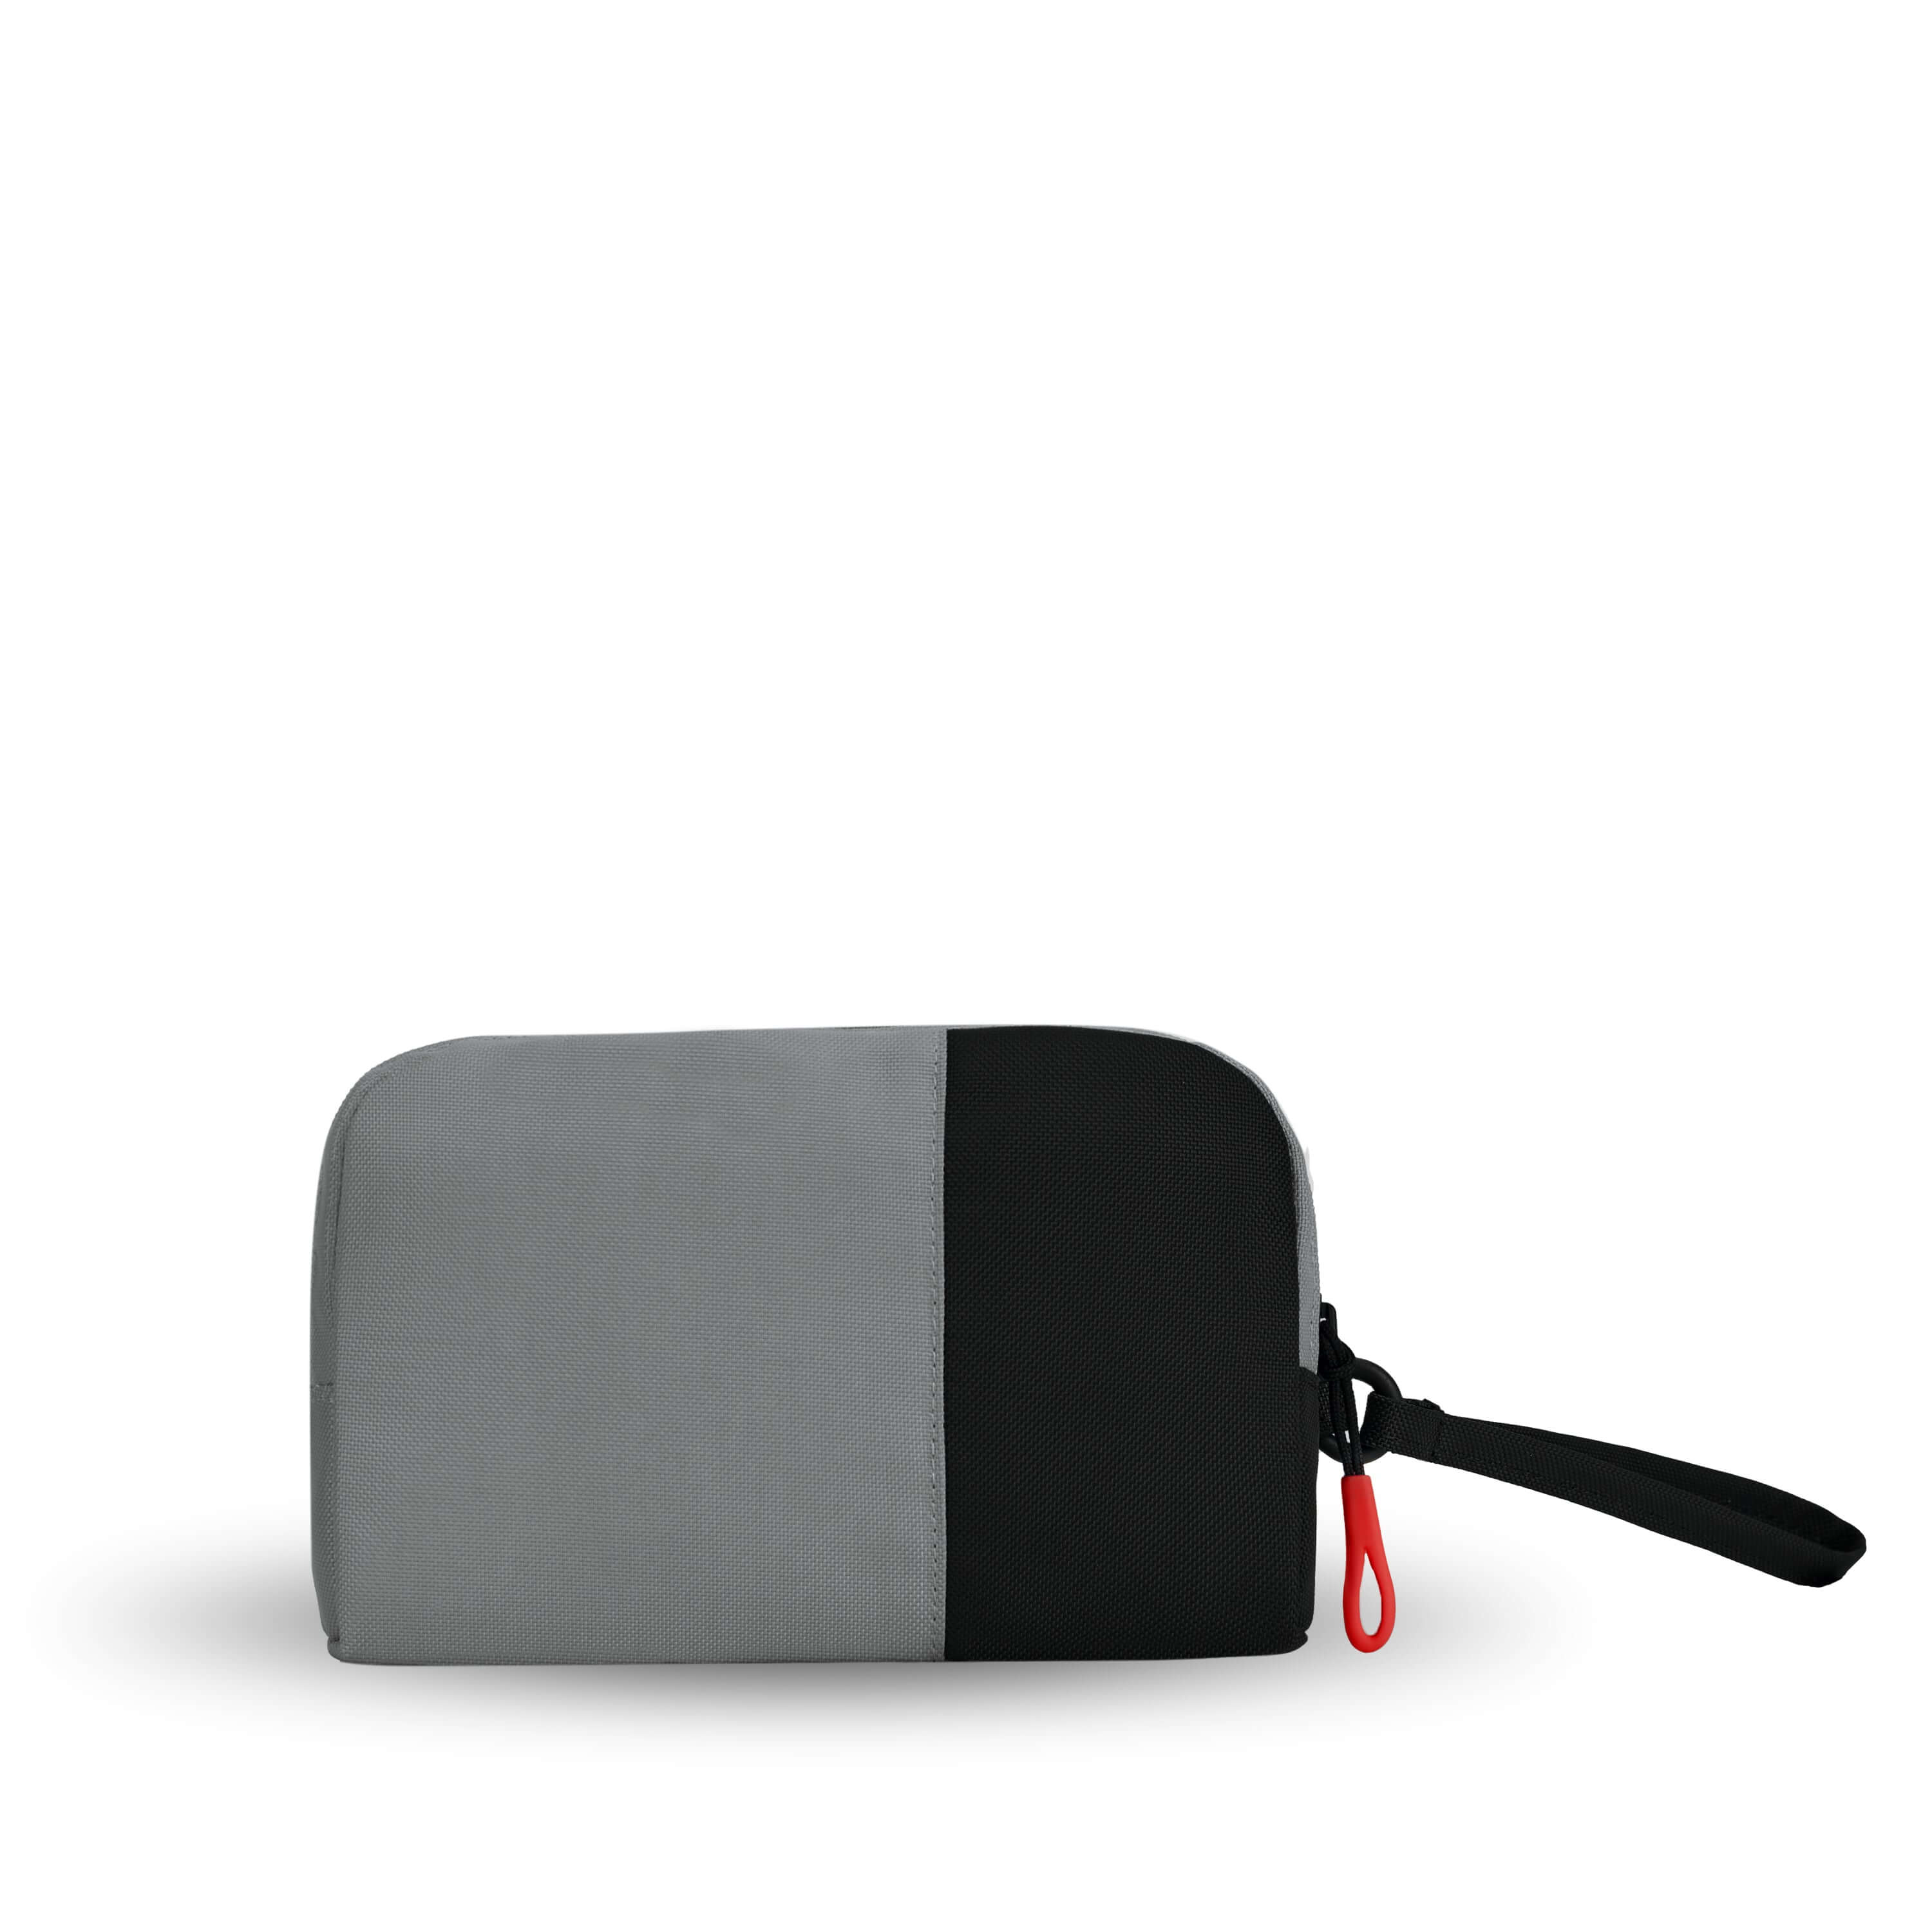 Back view of Sherpani travel accessory, the Jolie in Stone, in medium size. The pouch is two-toned in gray and black. It features a black wristlet strap and an easy-pull zipper accented in red.